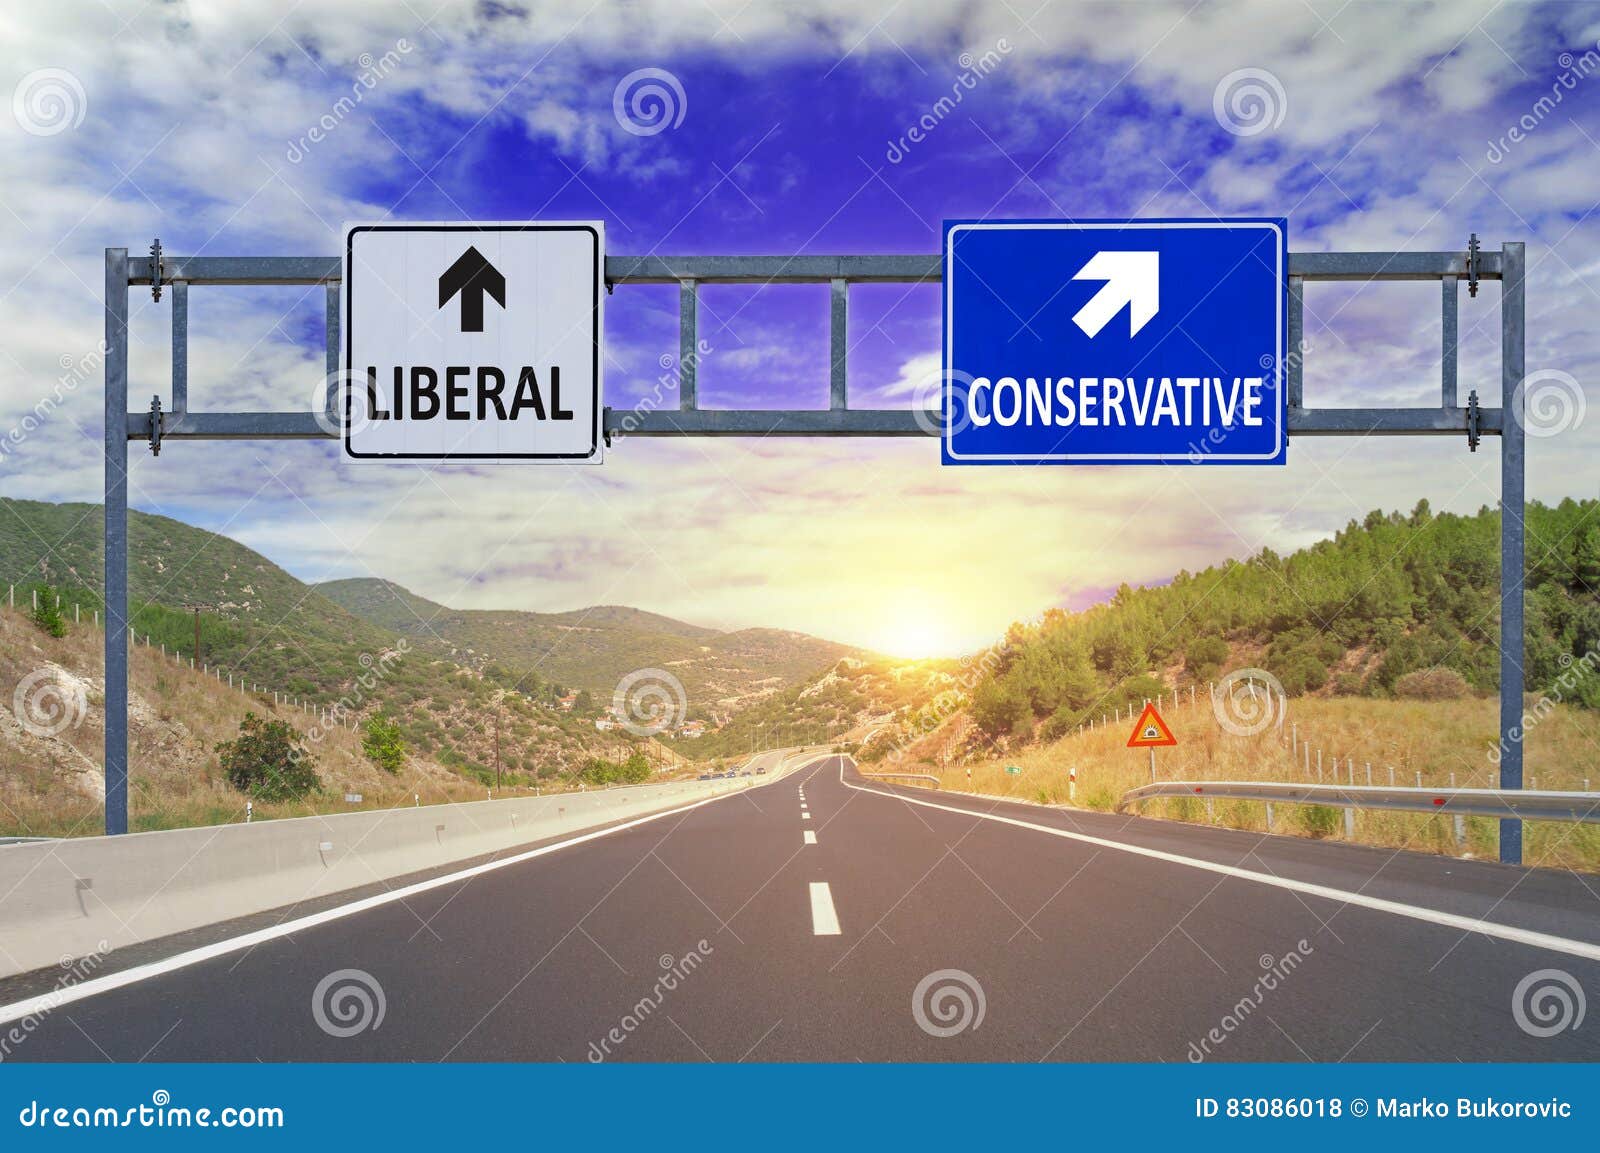 two options liberal and conservative on road signs on highway